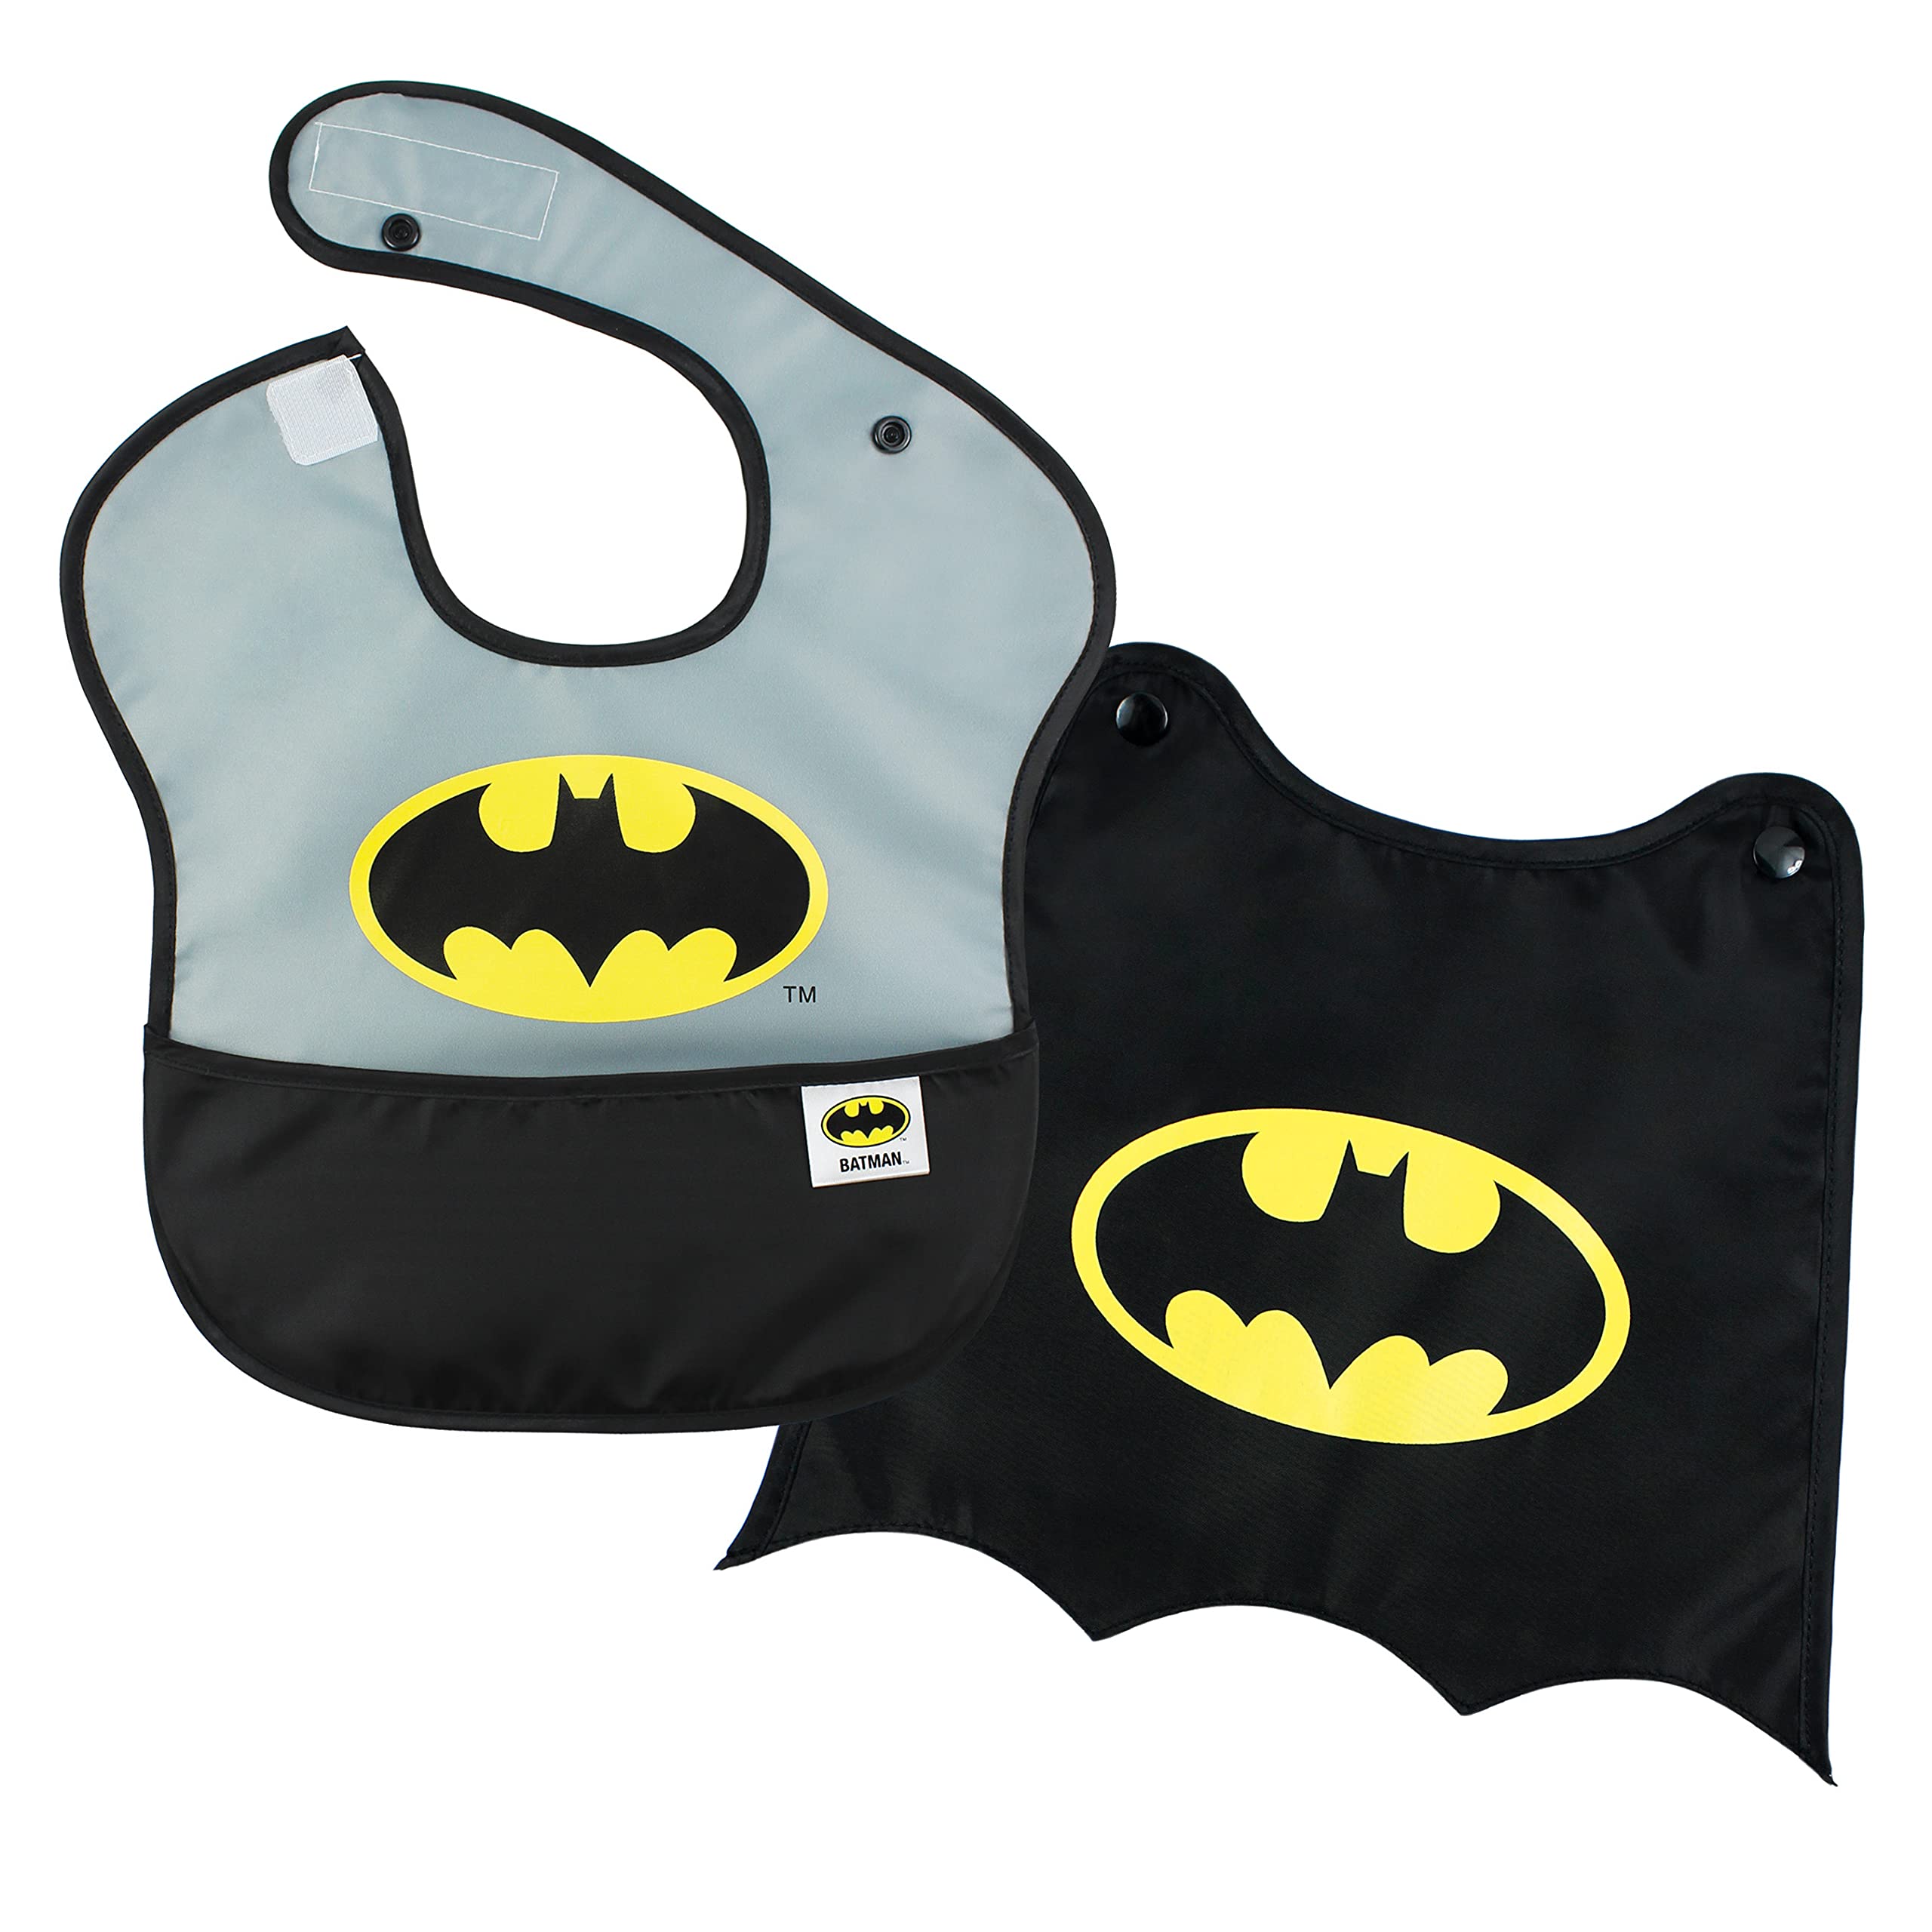 Book Cover Bumkins Bibs, Baby Bibs for Girl or Boy, SuperBib Baby and Toddler Bib 6-24 Months, Bib for Eating, Waterproof Fabric 1-Pack Batman, Cape